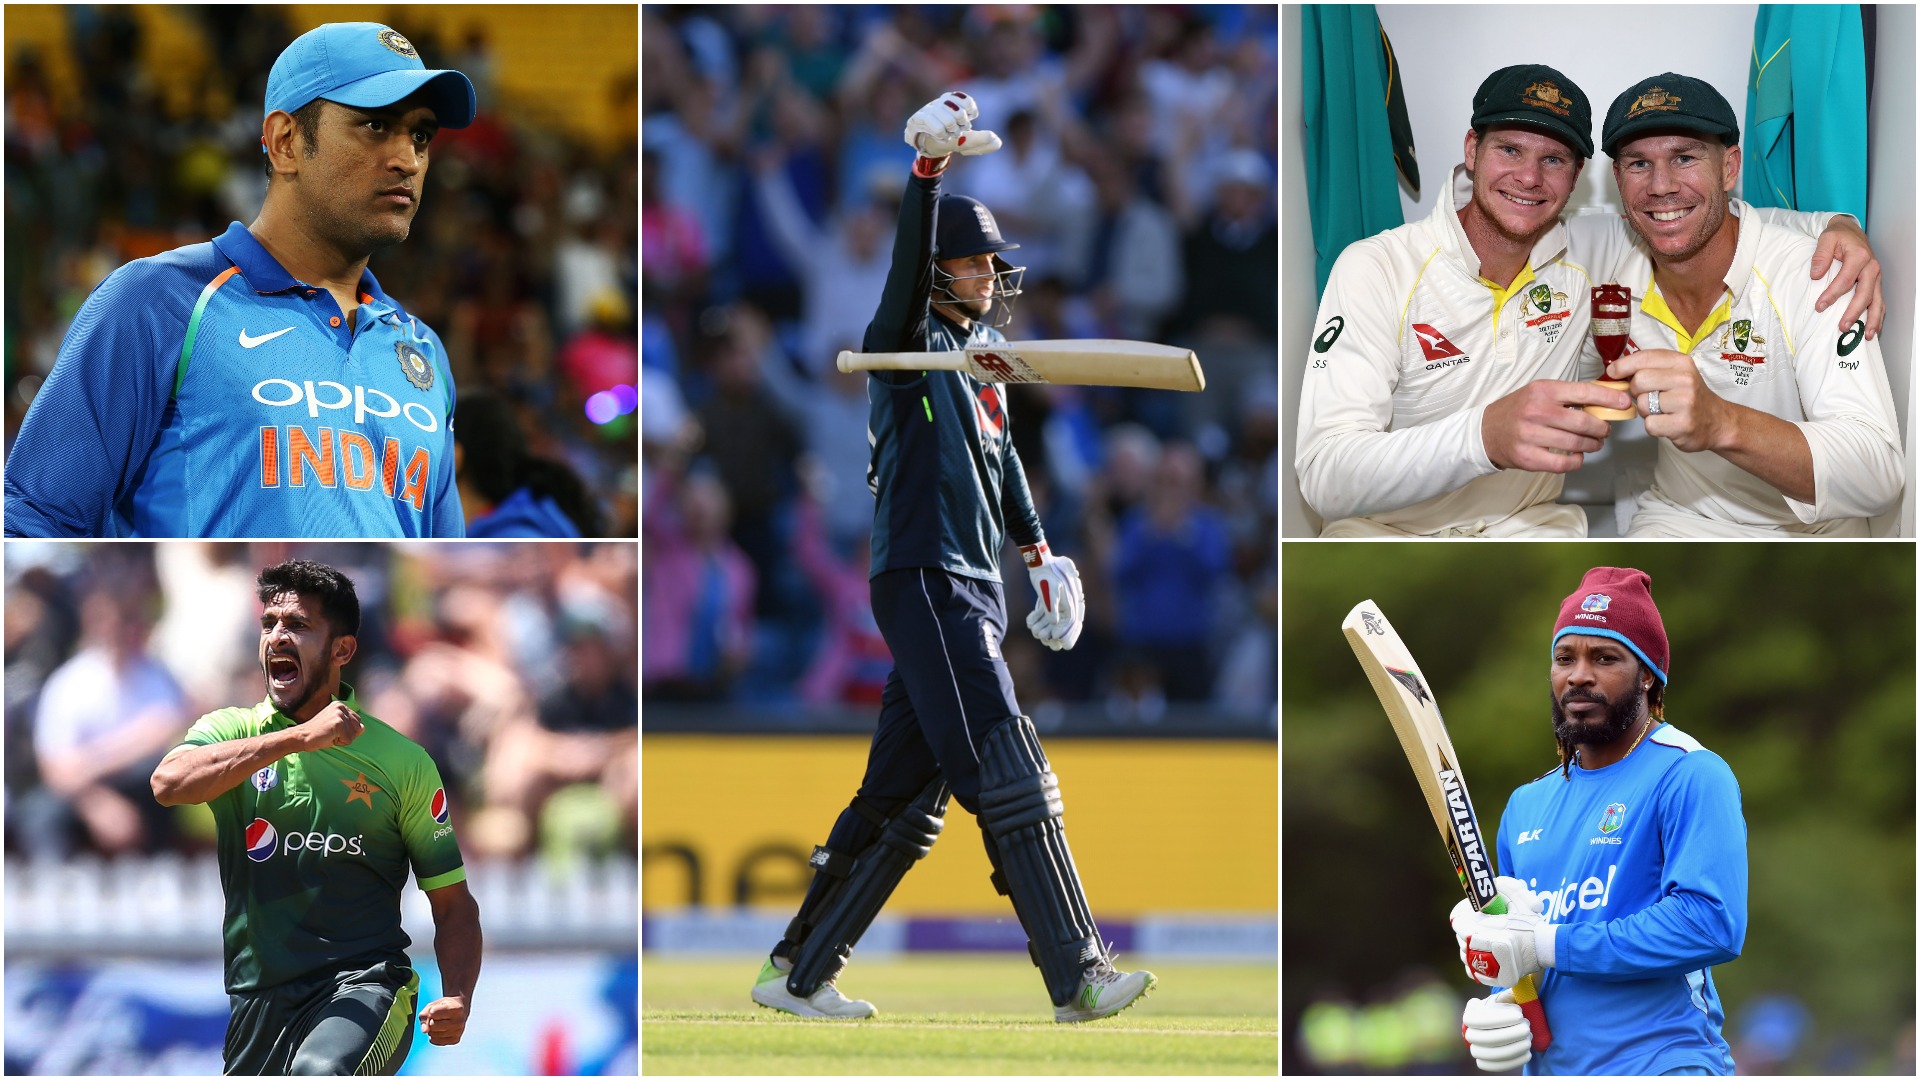 The Cricket World Cup is 100 days away. We have examined five key questions surrounding the likes of Steve Smith, MS Dhoni and Chris Gayle.